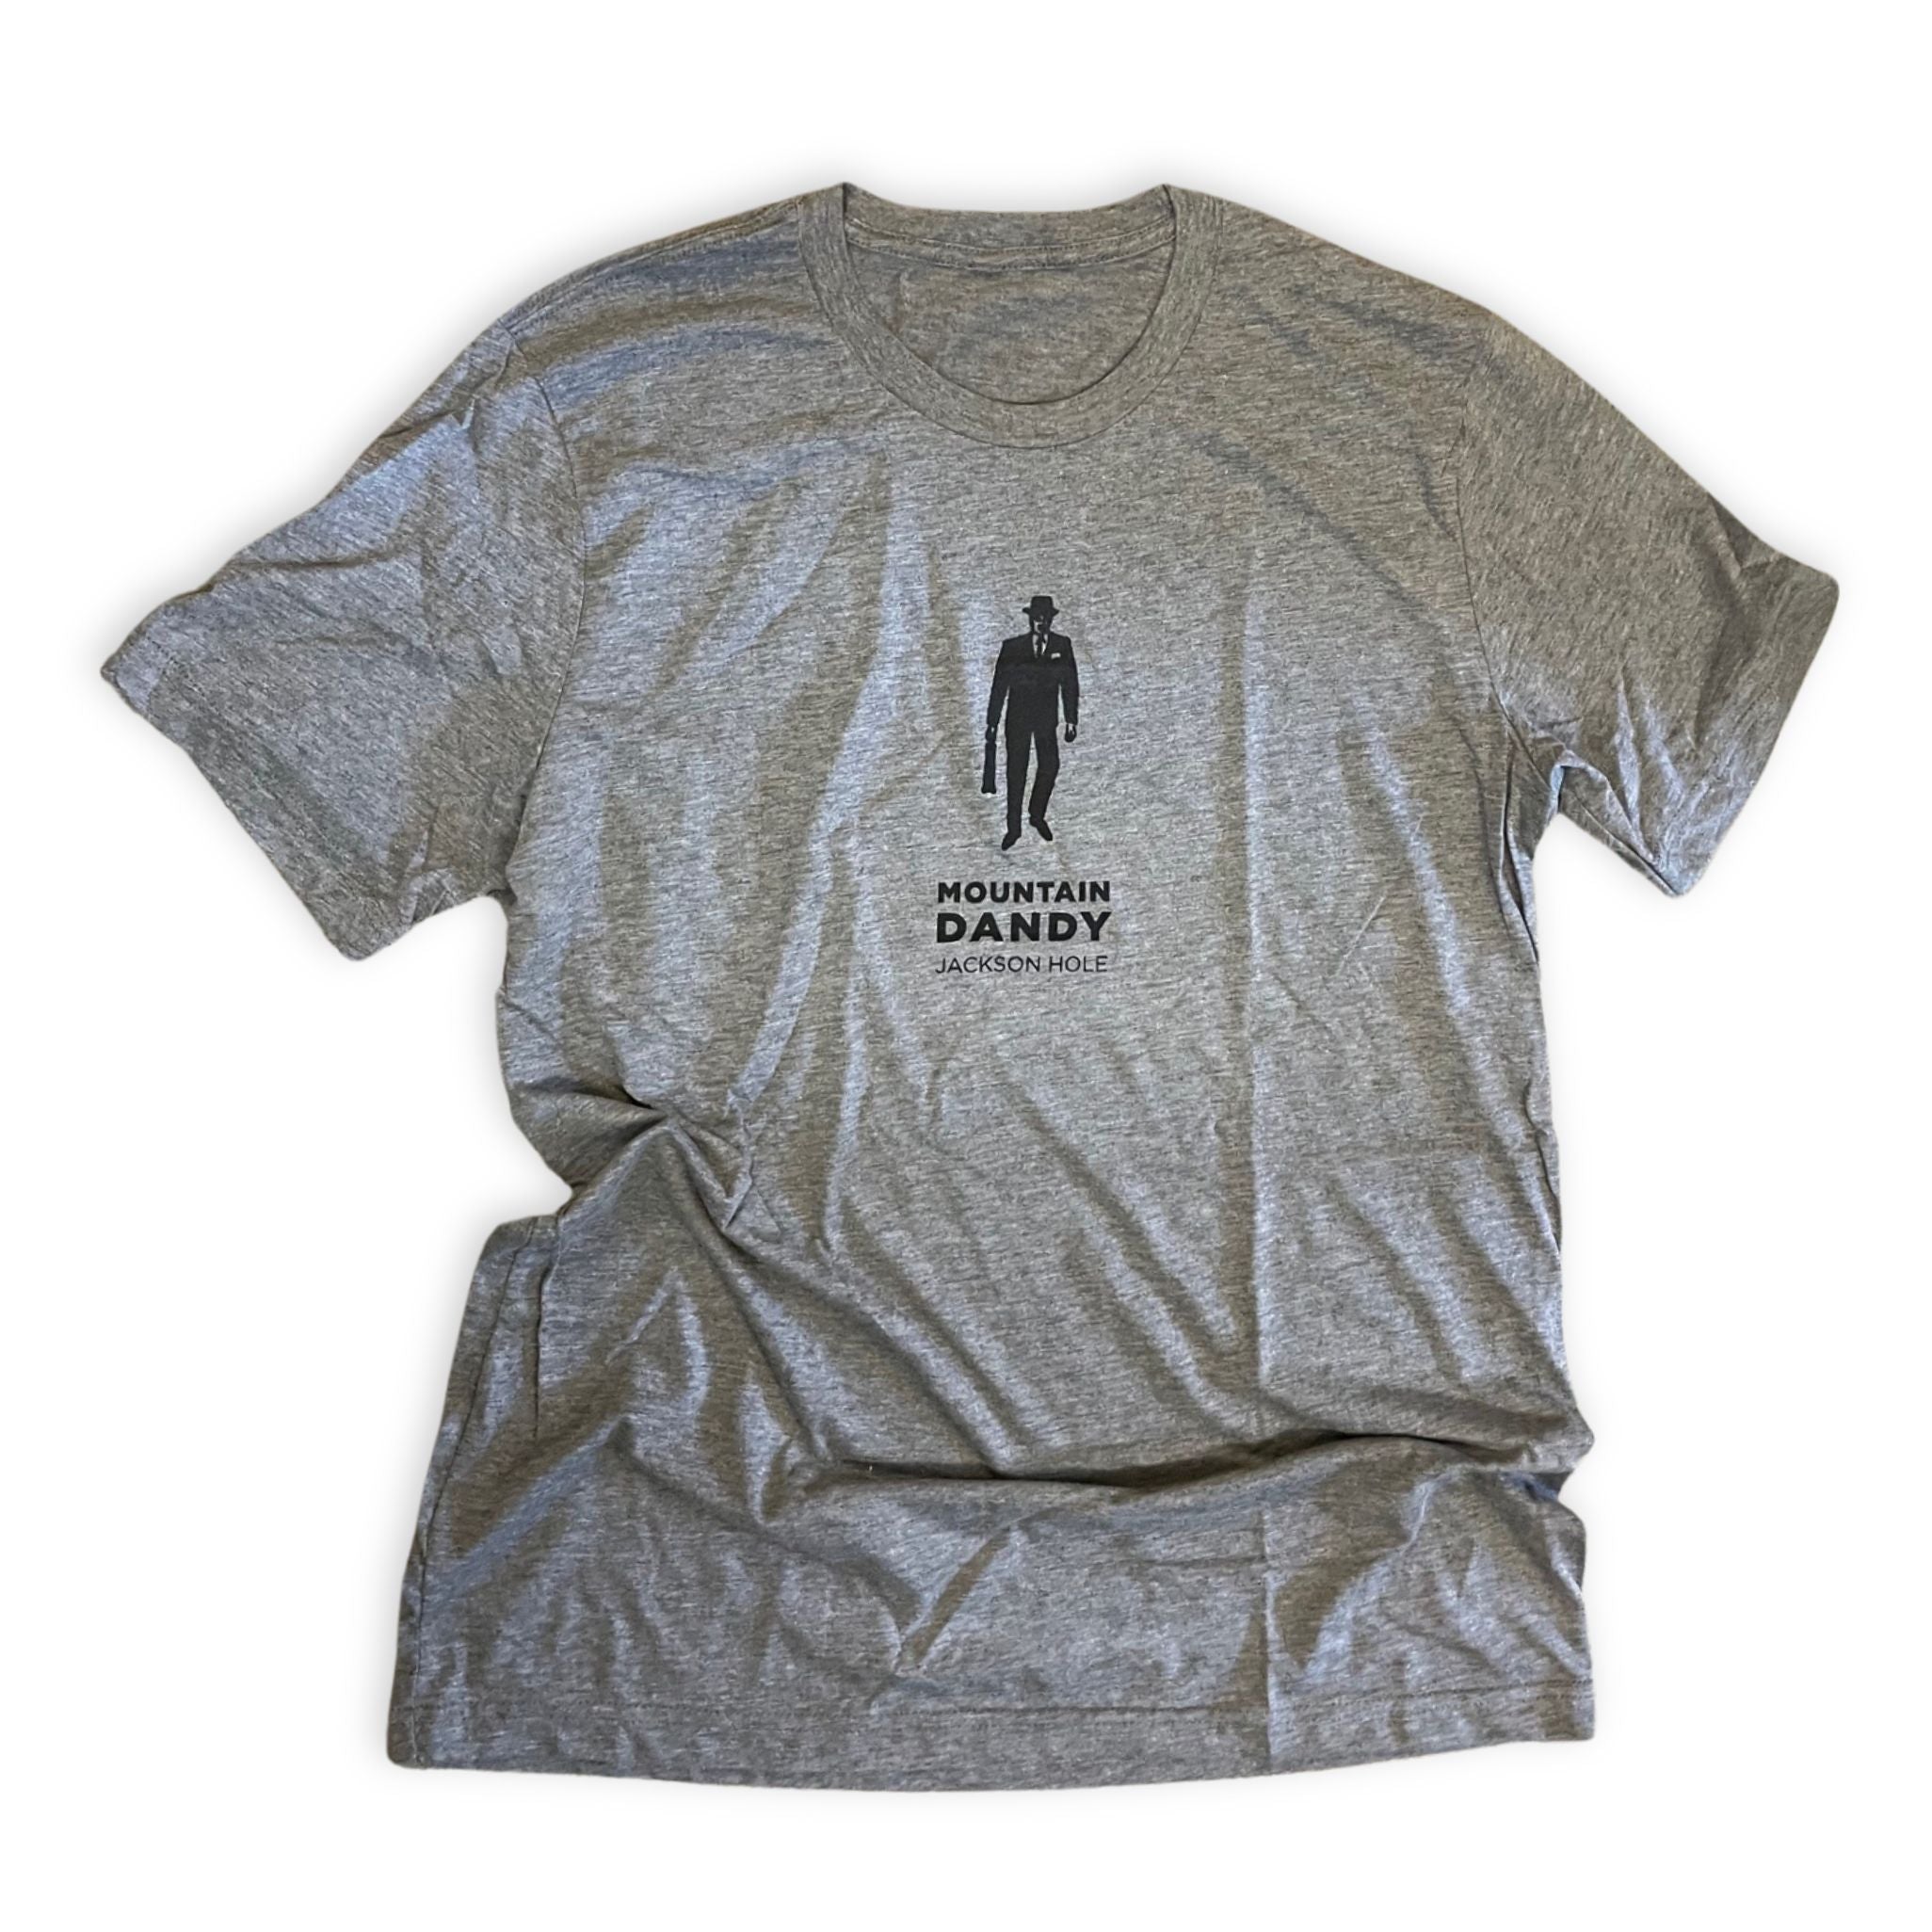 Grey shirt with man and briefcase above the store logo - Mountain Dandy